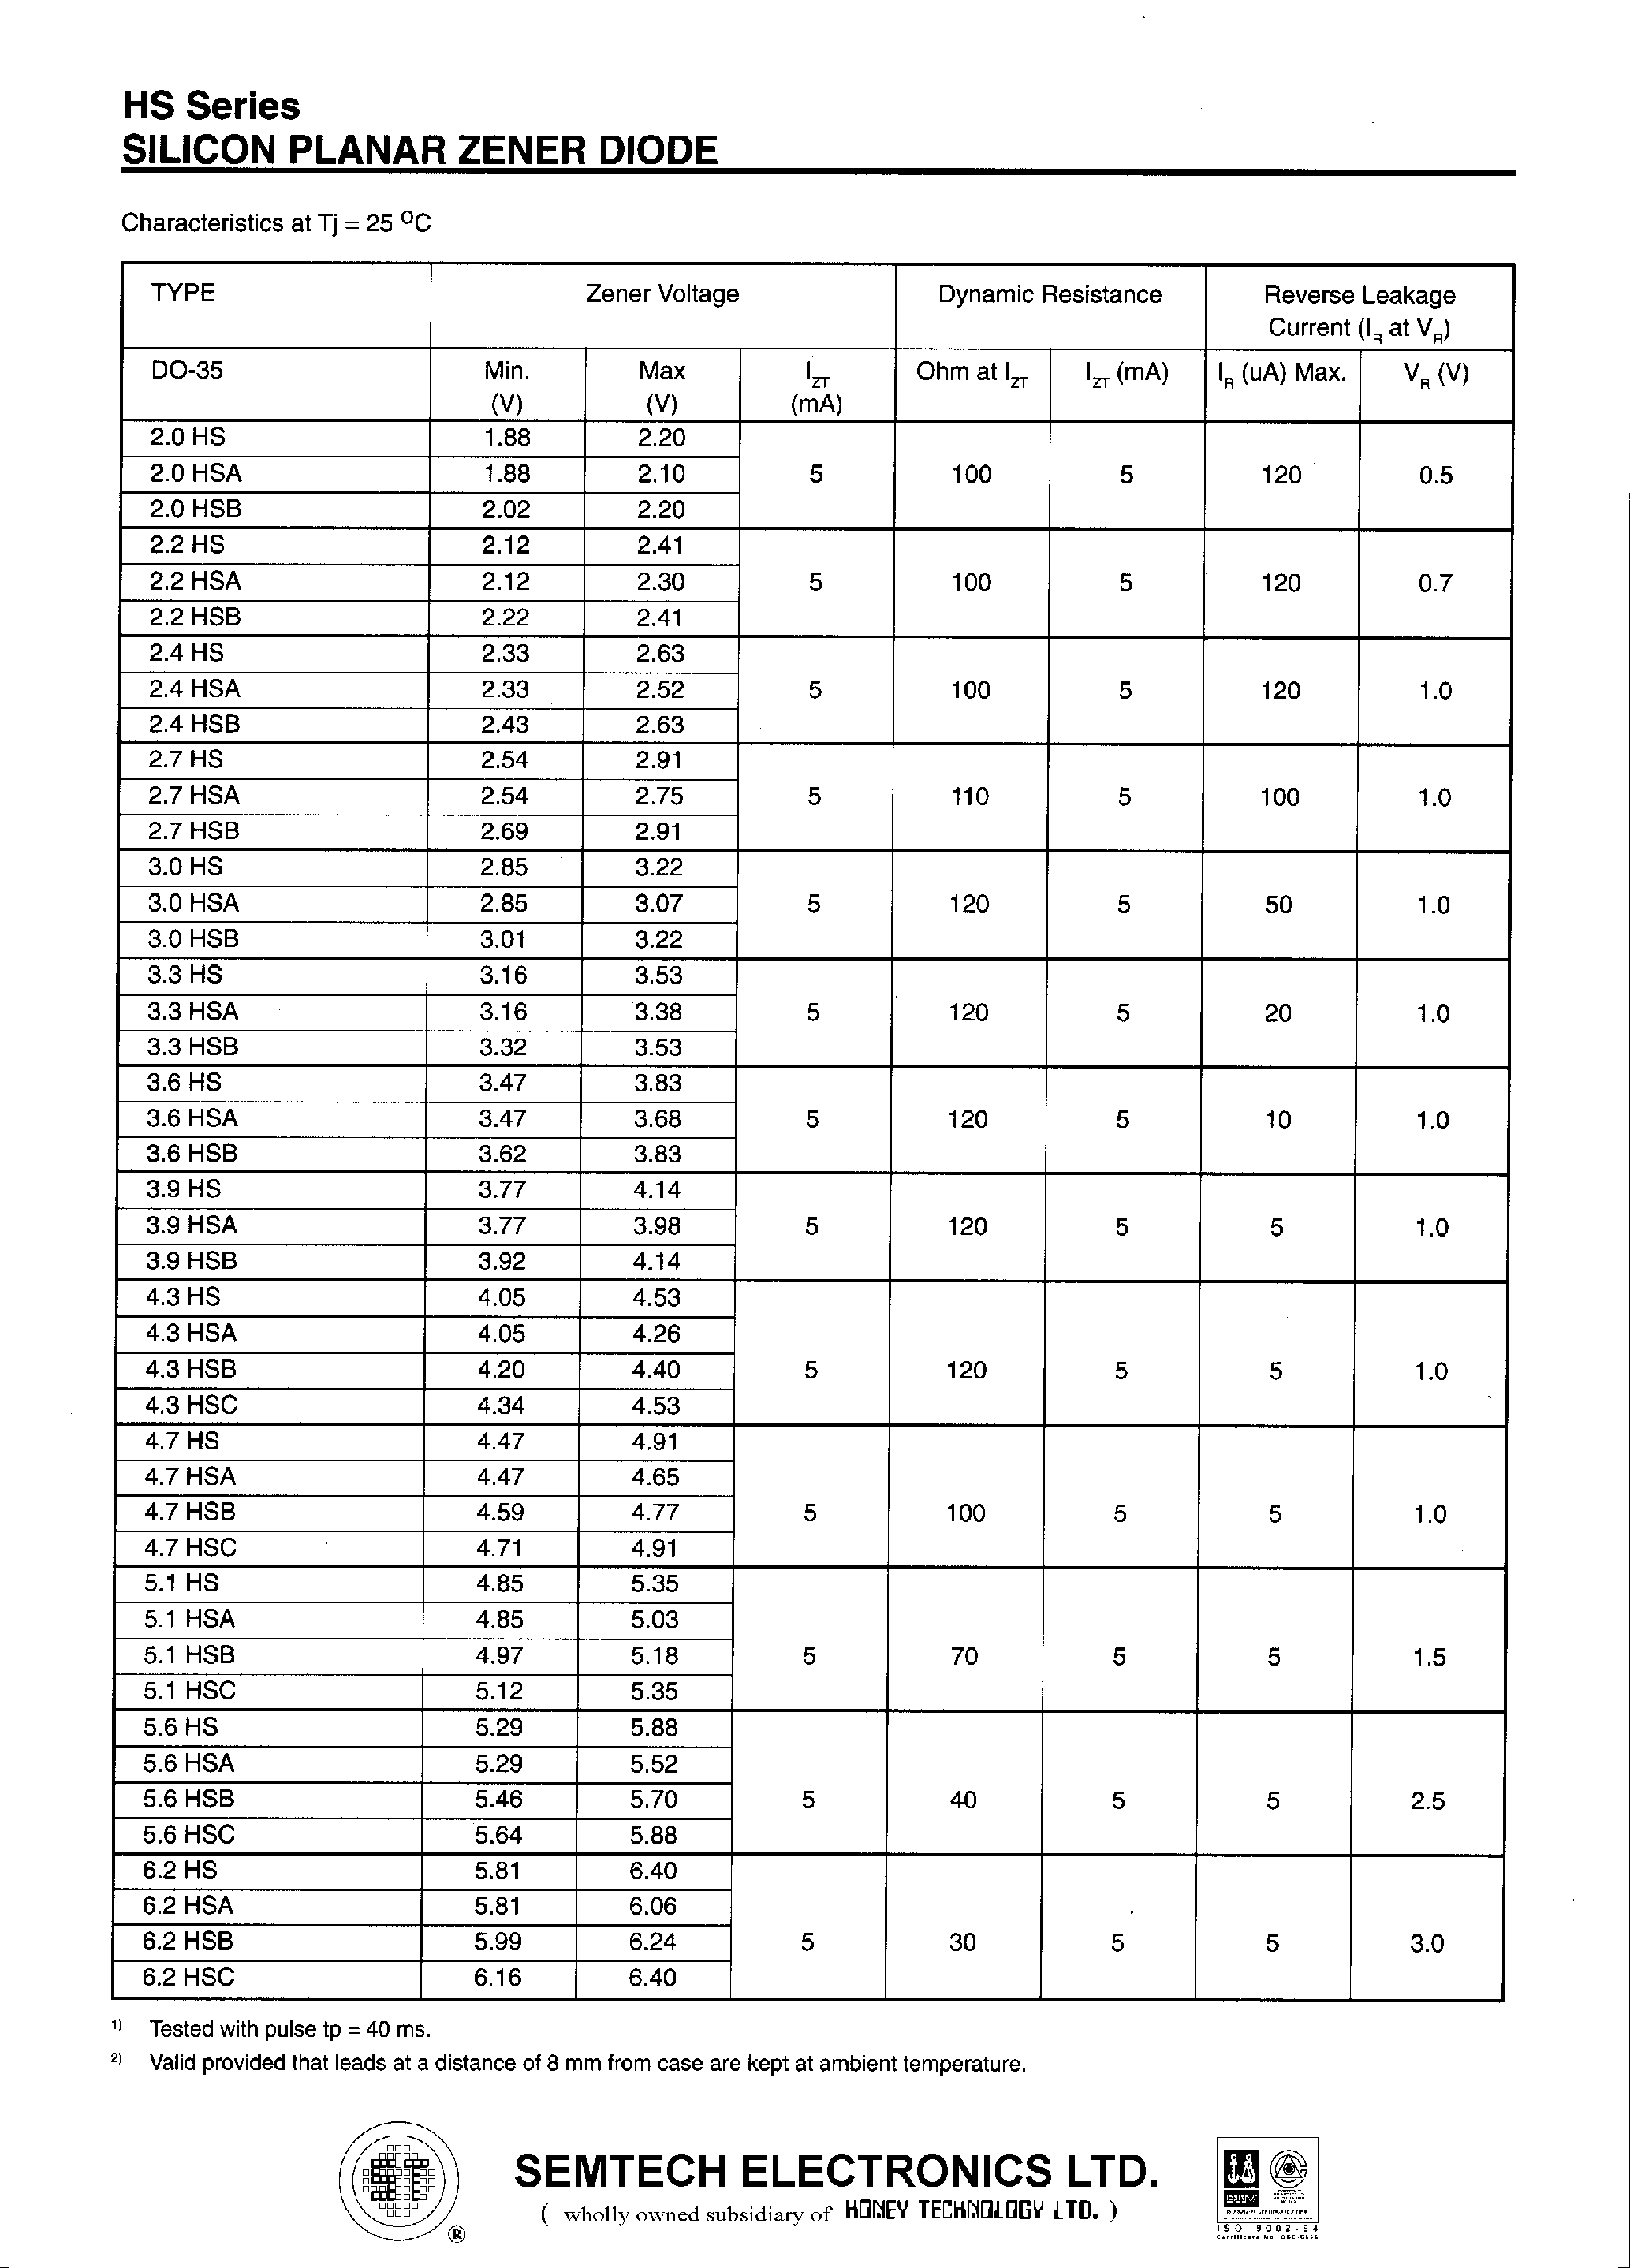 Datasheet 5.1HS - SILICON PLANAR ZENER DIODE page 2